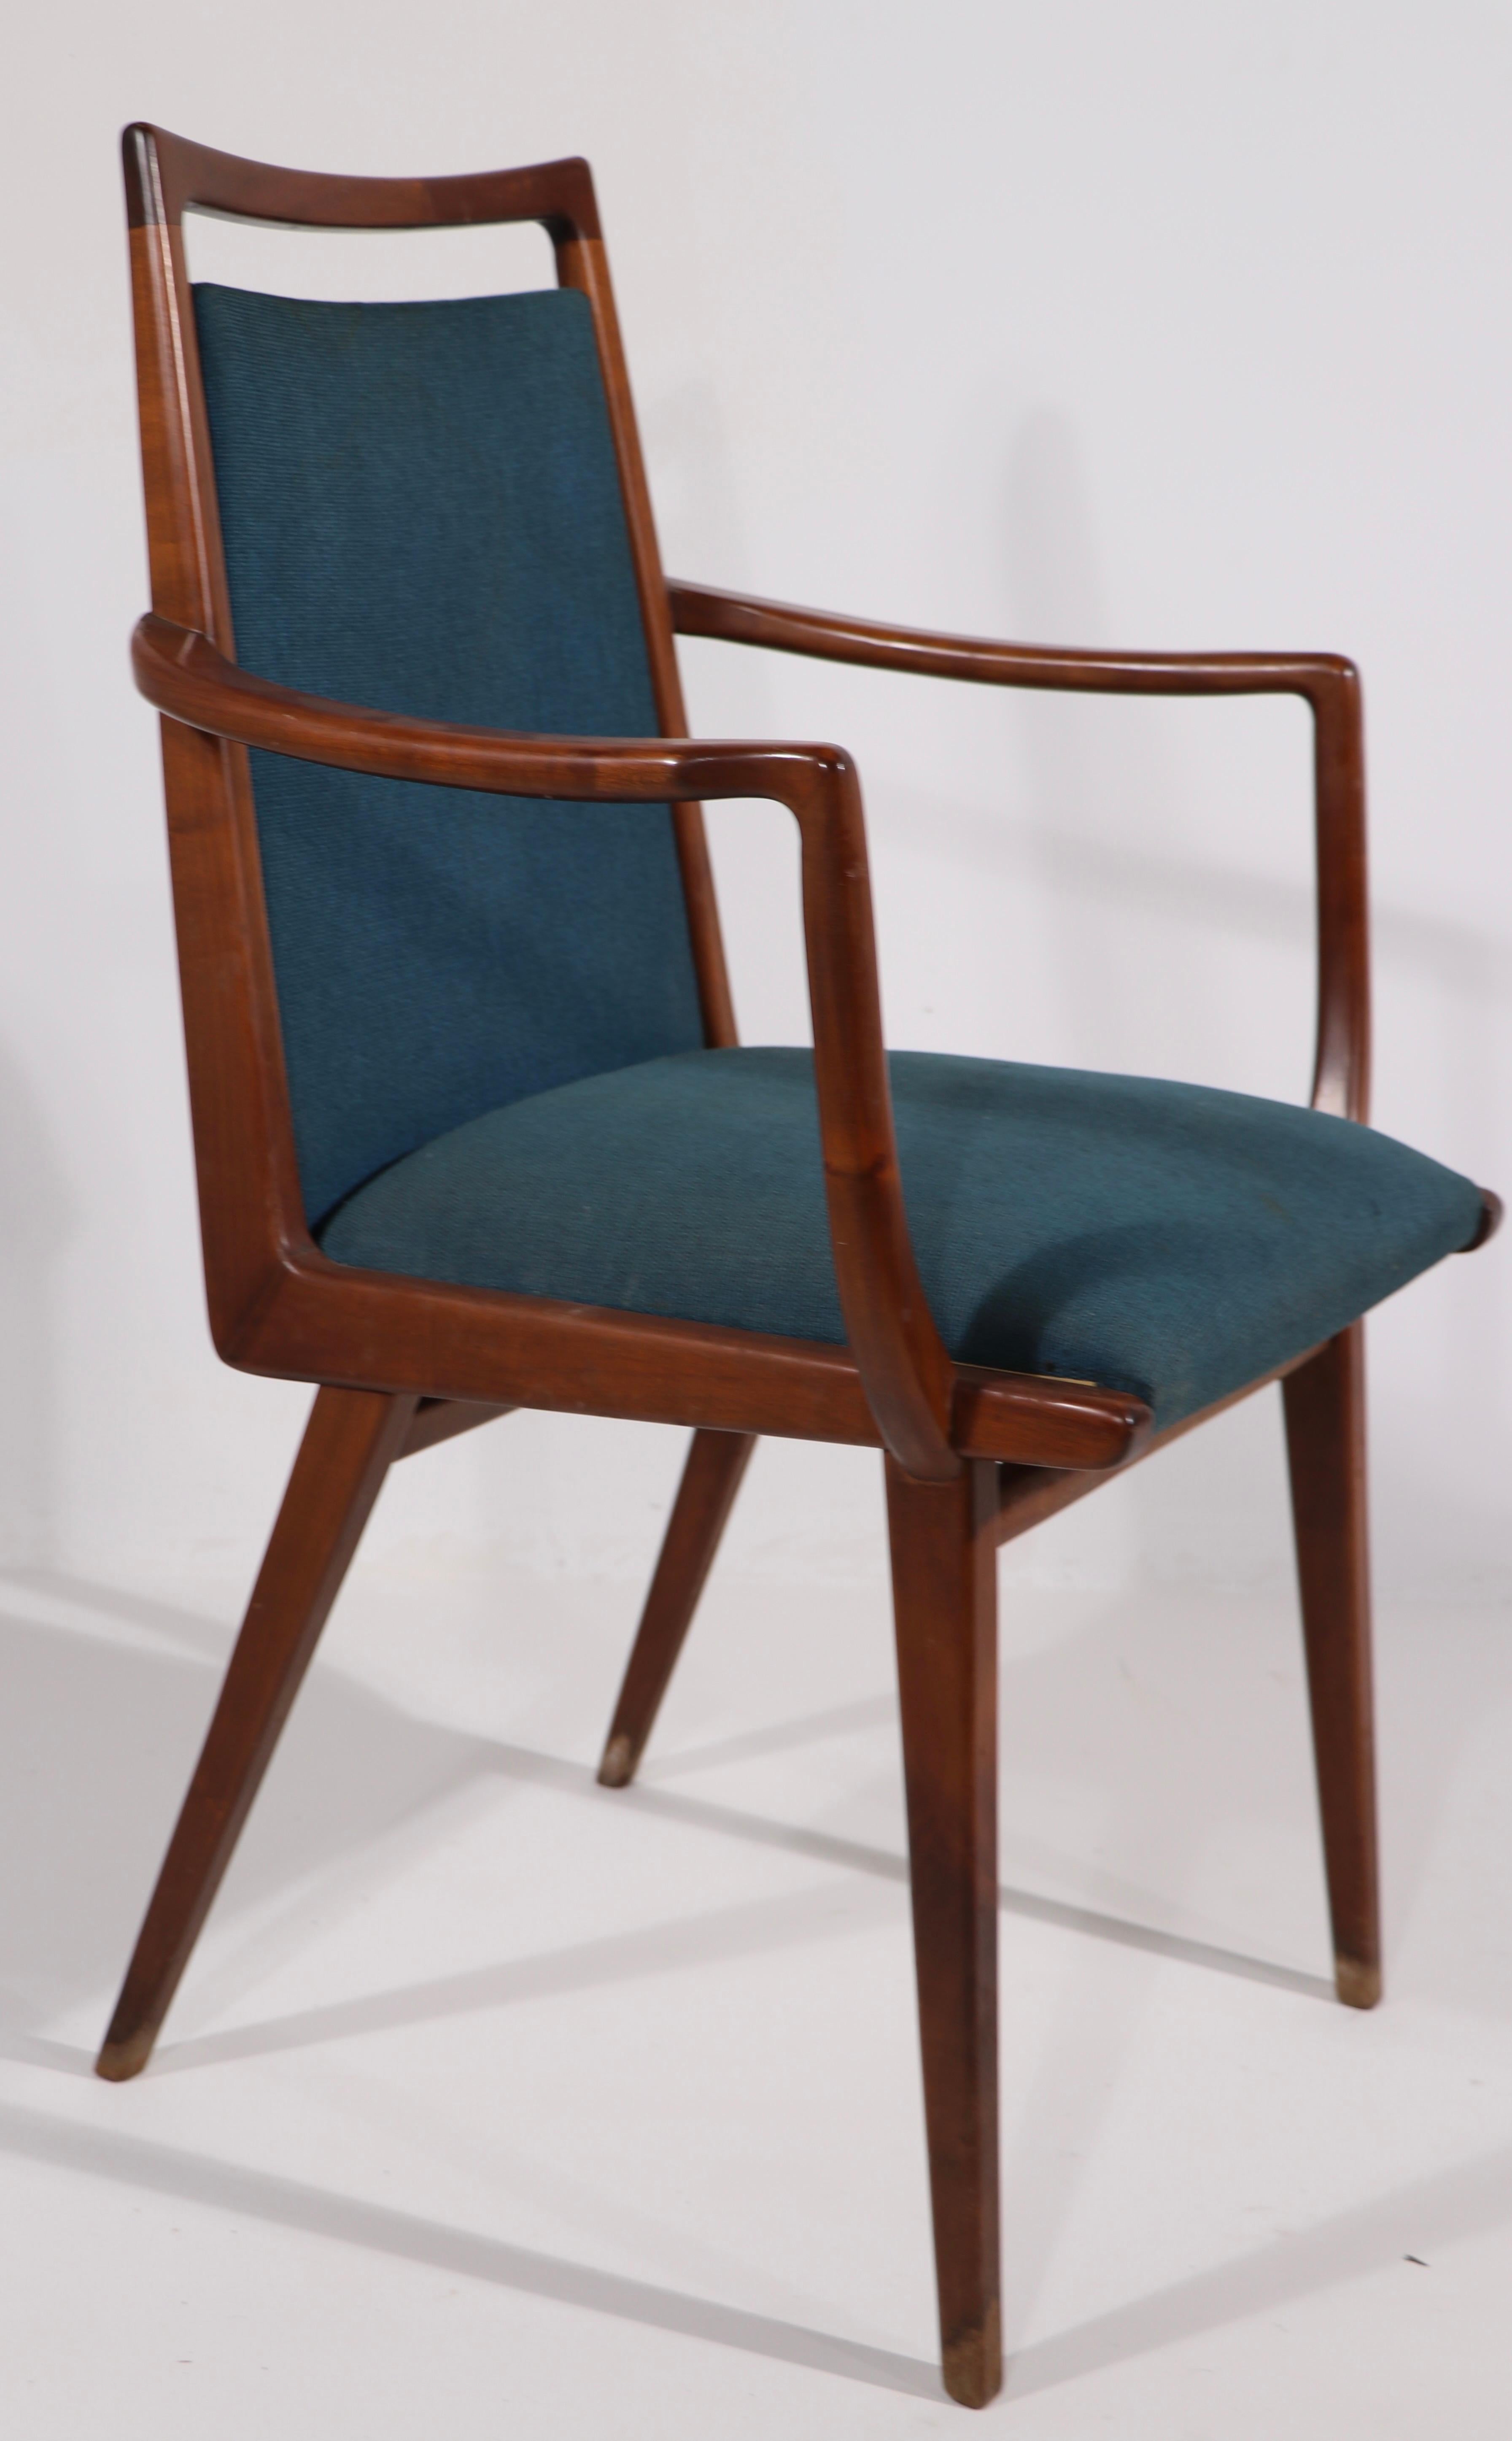 Sophisticated sculptural set of mid century dining chairs, made in Germany, for Casala. The set consists of 2 armchairs, and 4 side chairs. The solid wood frames are all in very good, original condition, sturdy, light and ready to use. The fabric